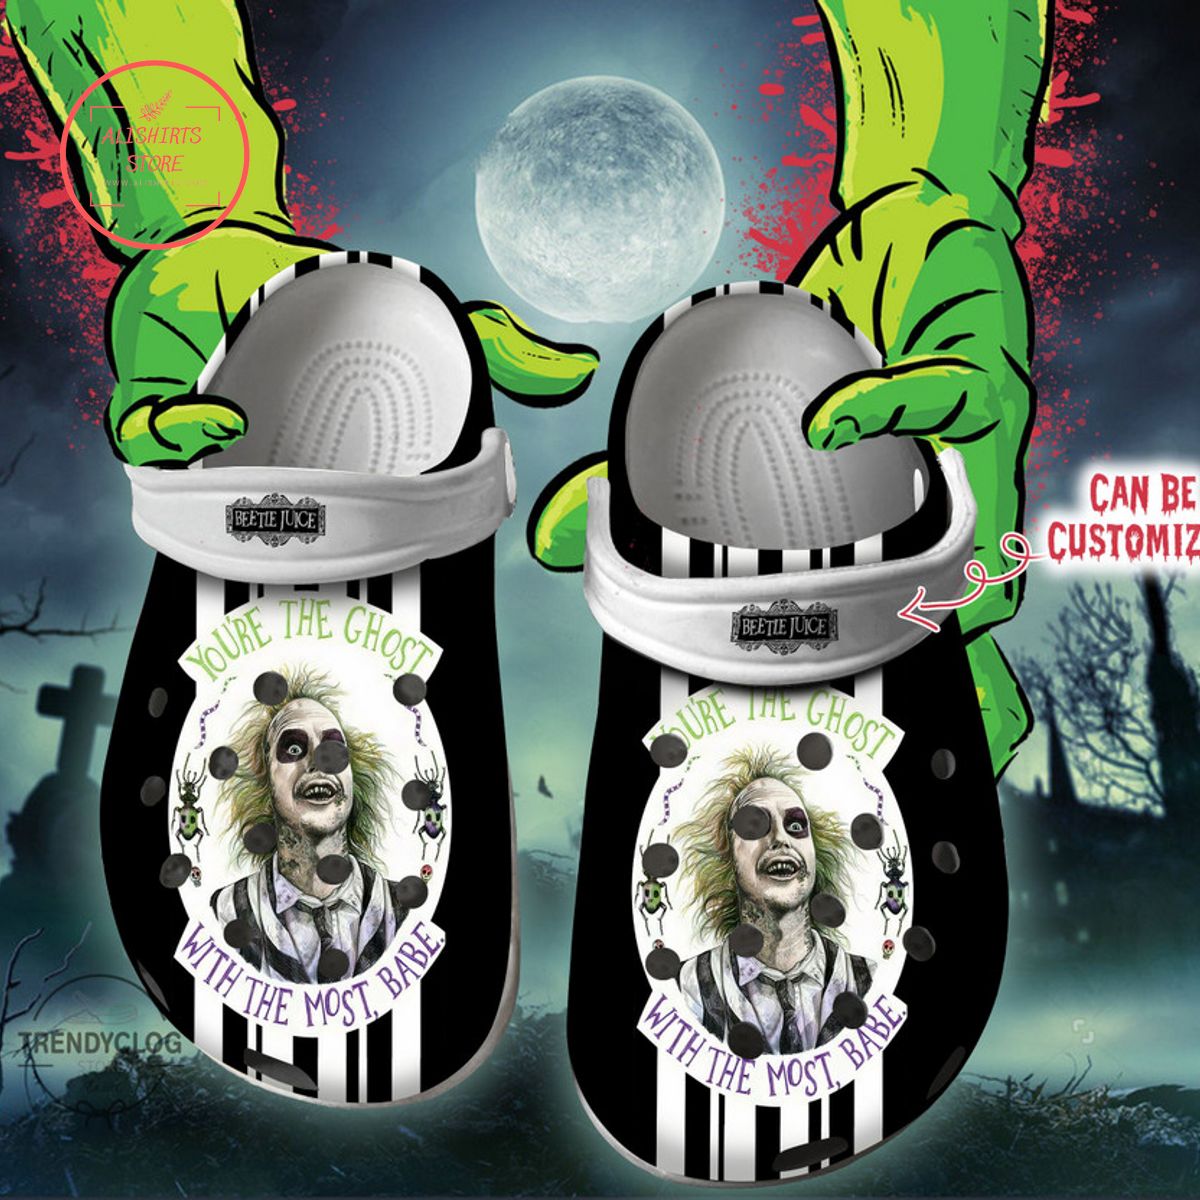 Personalized Horrors You're The Ghost With The Most Babe Clog Shoes